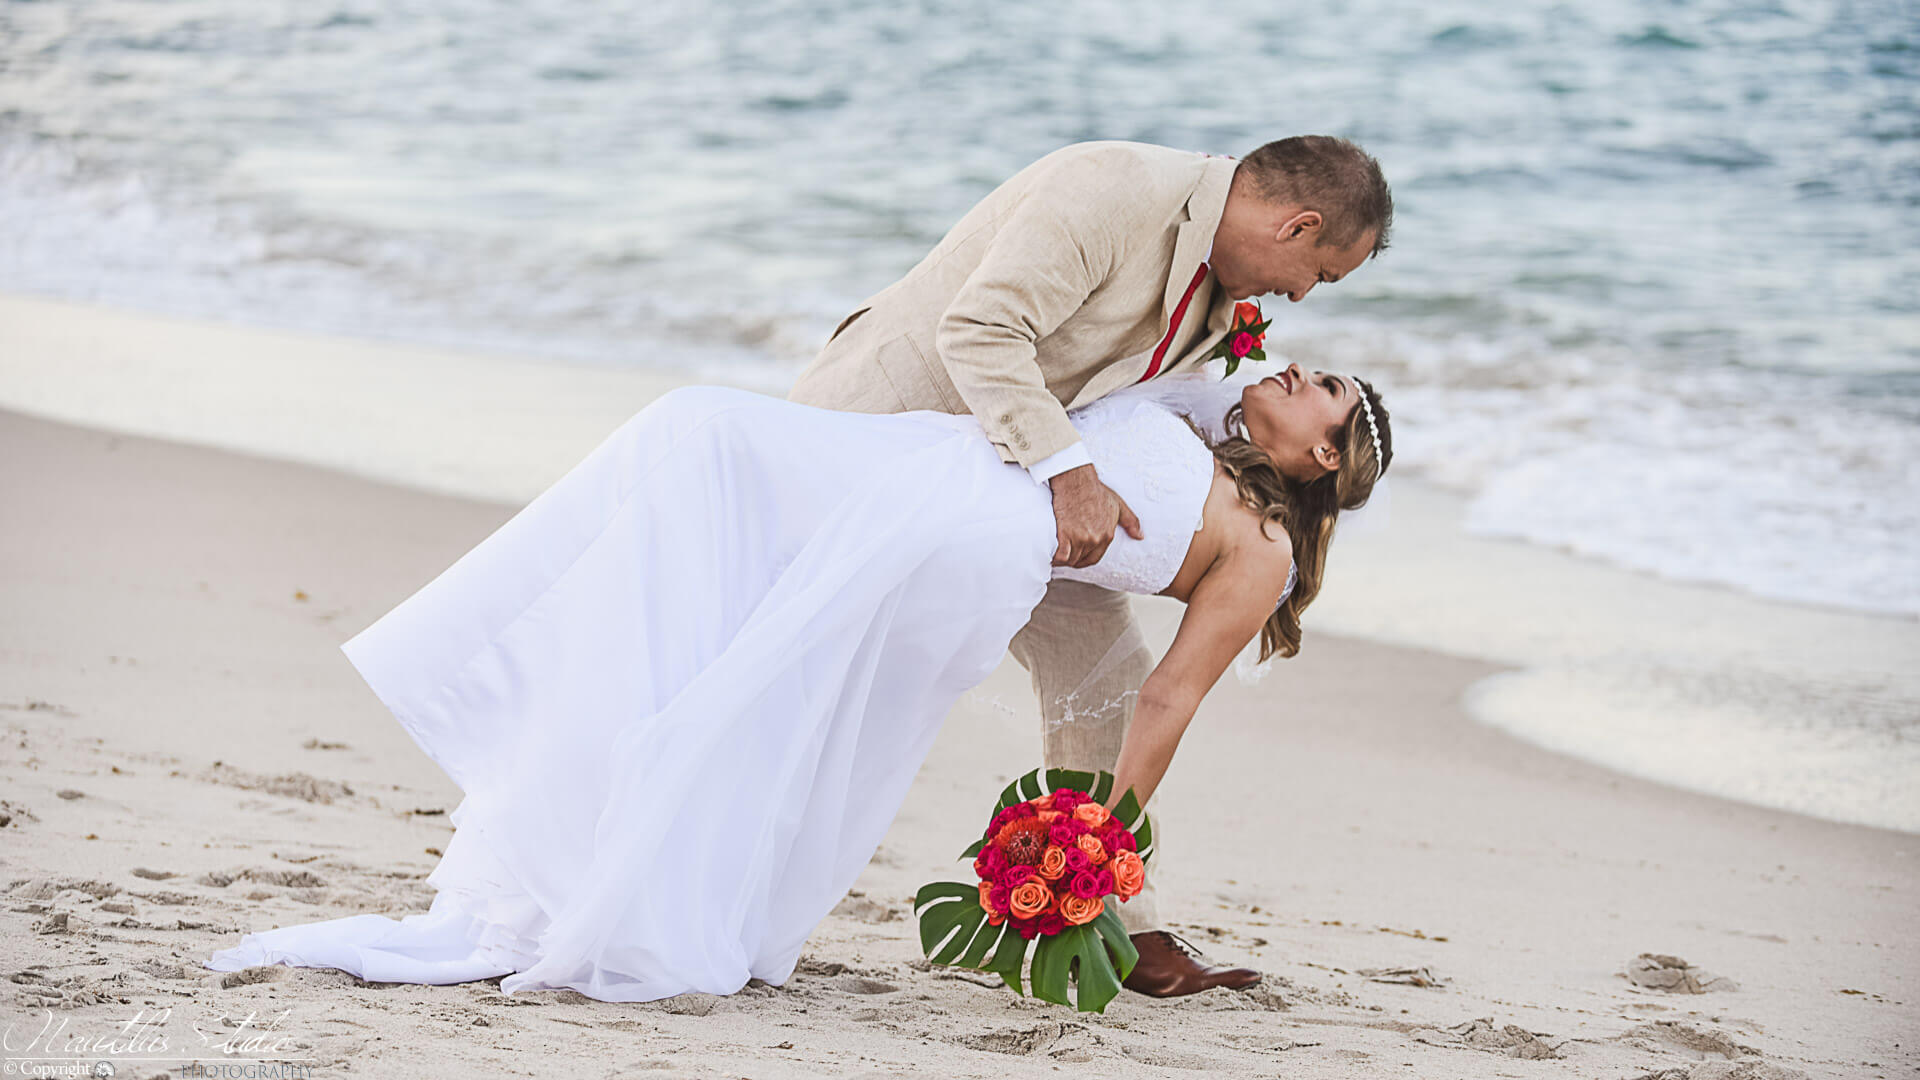 Commitment ceremony Florida, photo showing groom dancing with bride on the beach